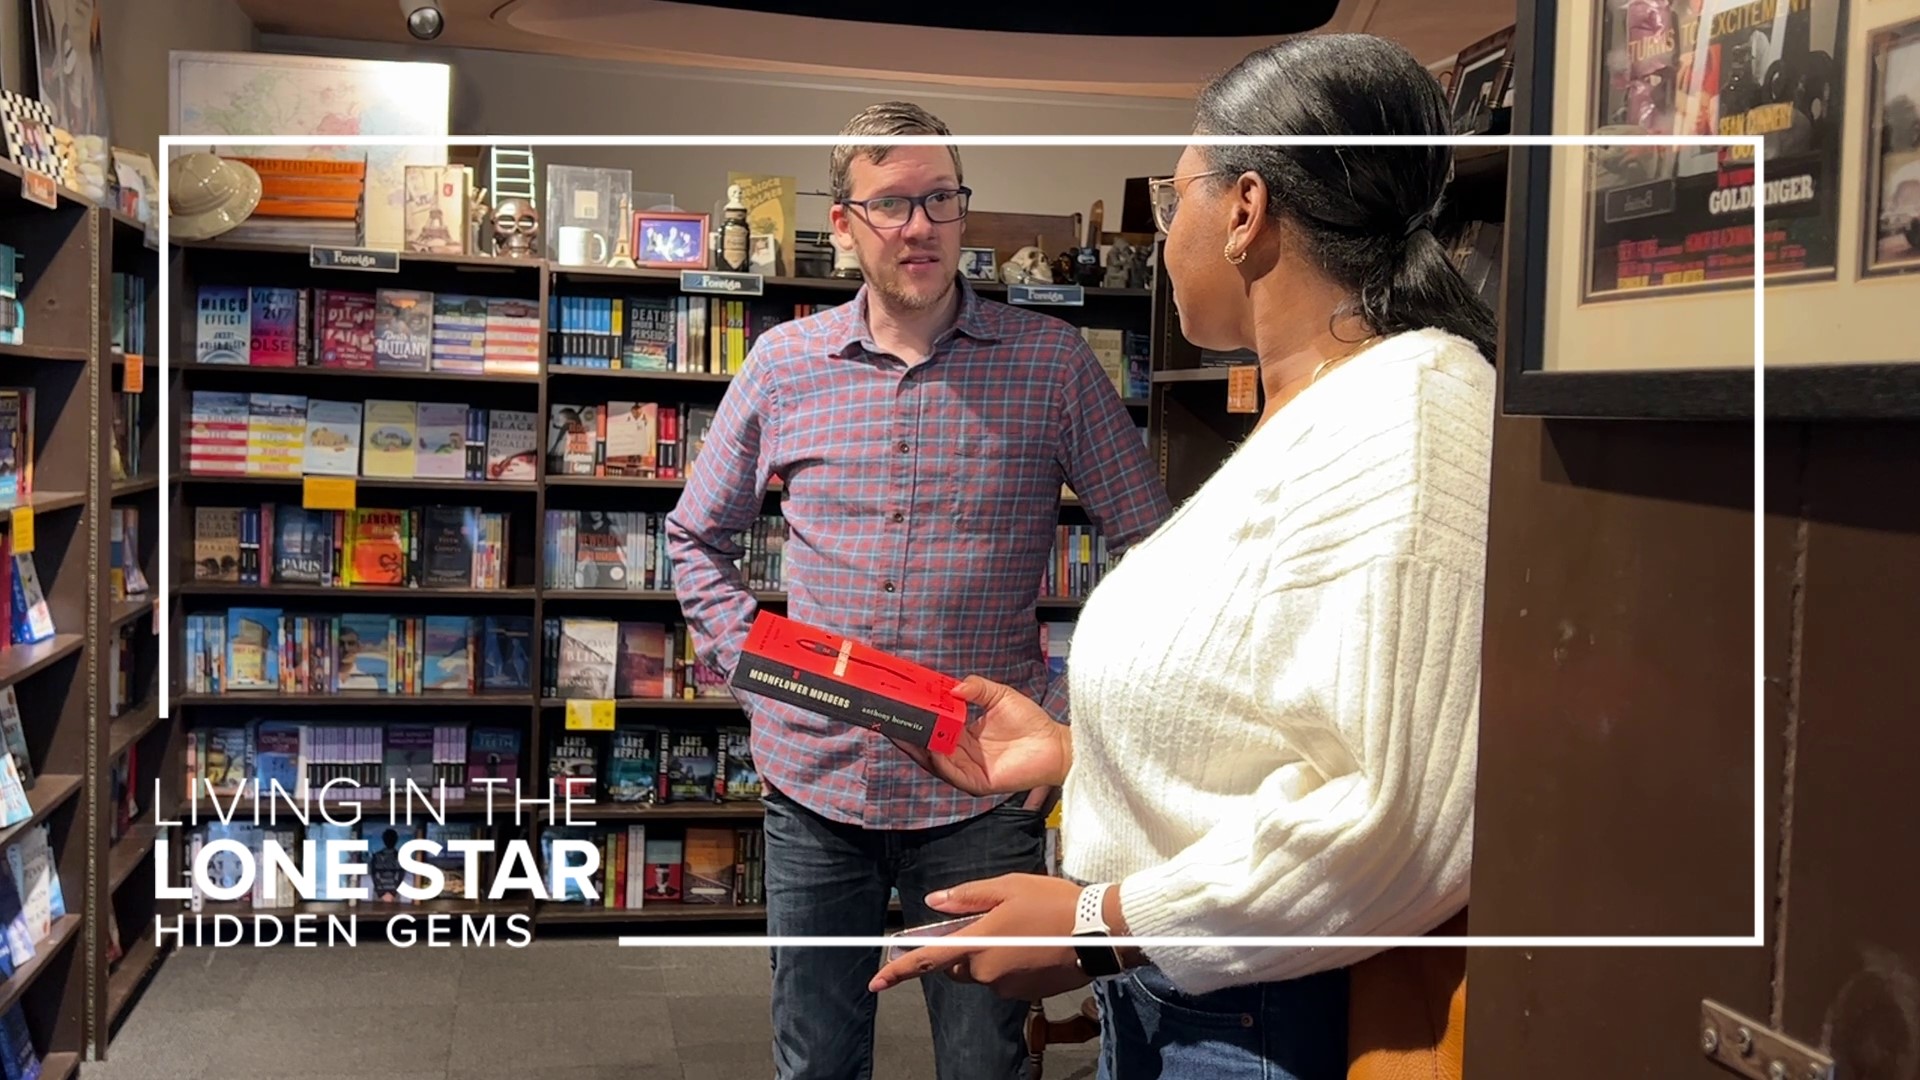 "All of my staff here are voracious readers and we consider ourselves walking encyclopedias on the genre," said Murder by the Book owner McKenna Jordan.